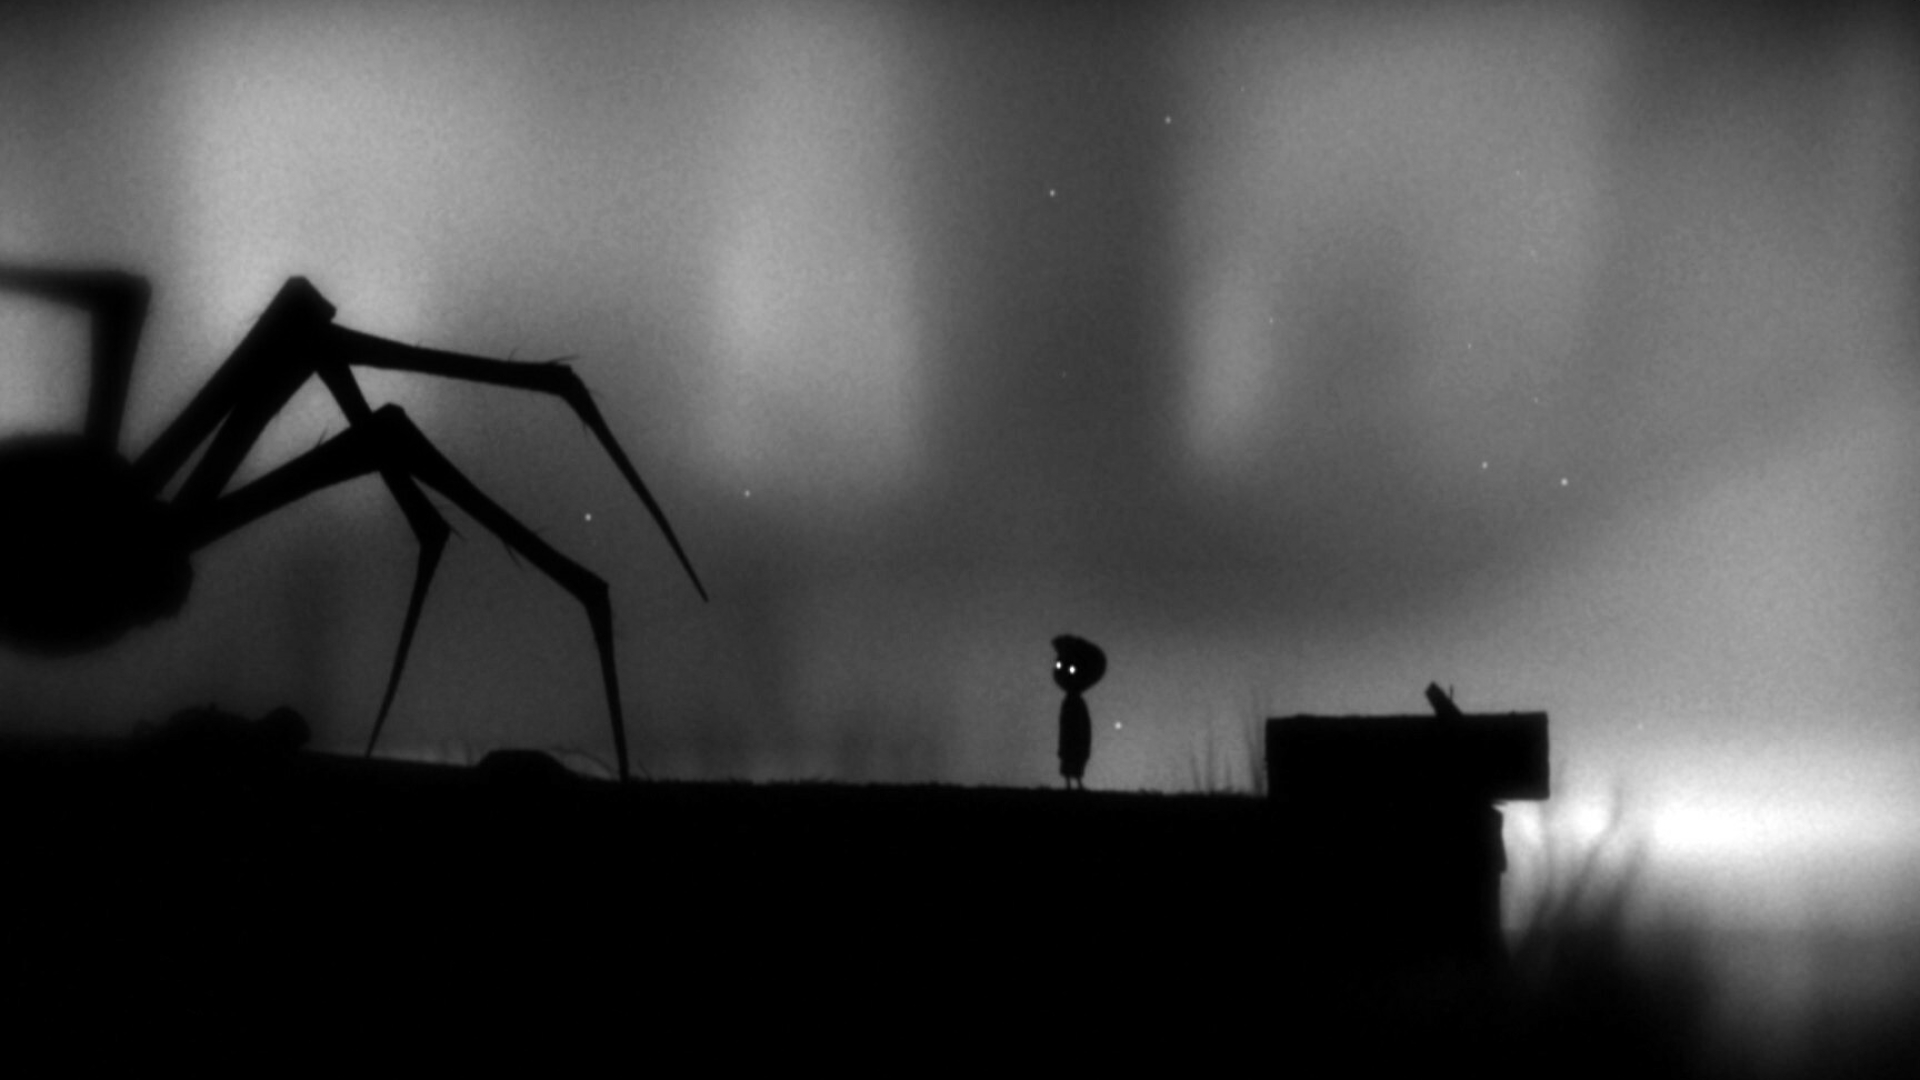 Limbo: Game achievements include finding hidden insect eggs and completing the game with five or fewer deaths, A black-and-white puzzler. 1920x1080 Full HD Wallpaper.